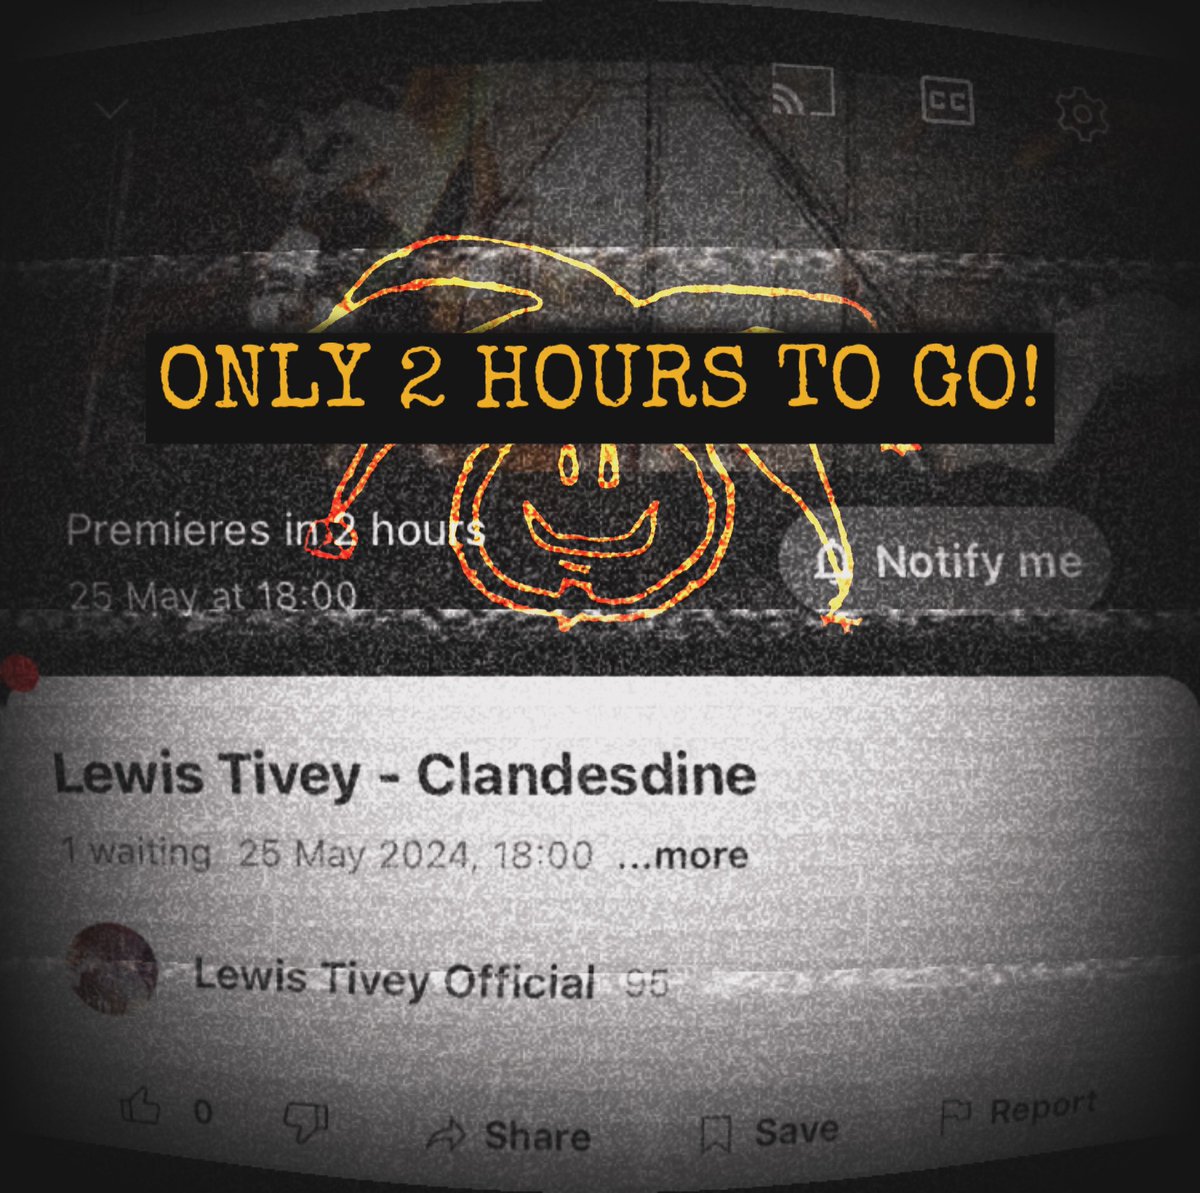 Only 2 hours to go until the premier on my latest Video ‘Clandesdine’! 🍿 🎥 🎶 See you there! 👋🏻 youtu.be/VTcyqyxKJm4?si… #new #music #video #musicvideo #premier #youtube #grunge #alternative #alternativerock #indie #underground